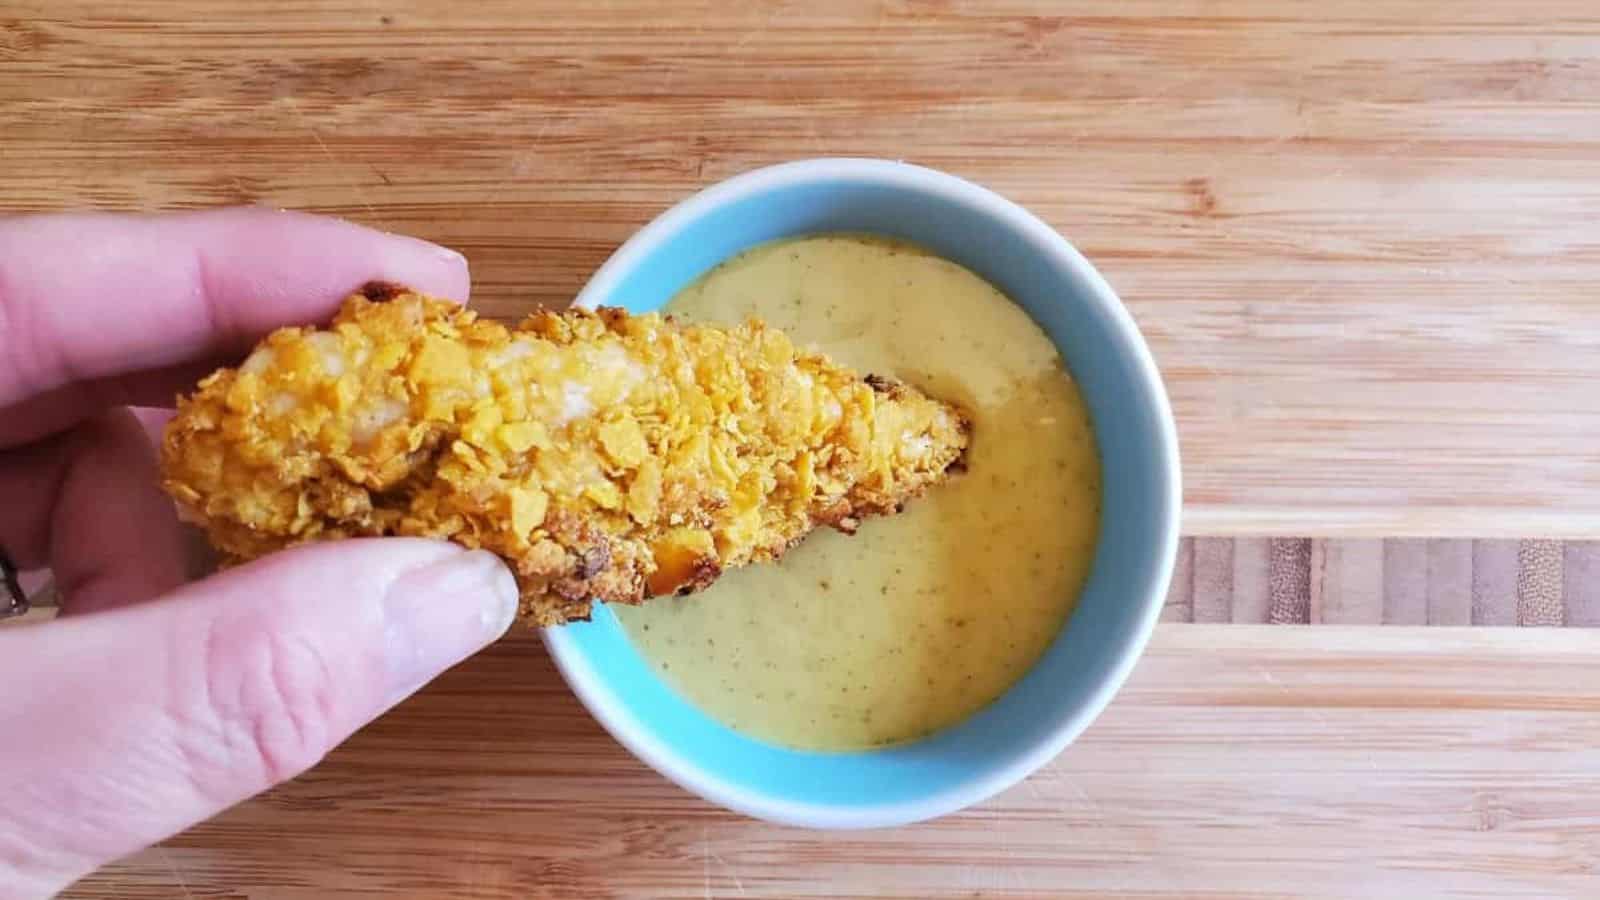 Image shows Hand dipping a corn flake crusted chicken tender into a bowl of sauce on a wooden table.